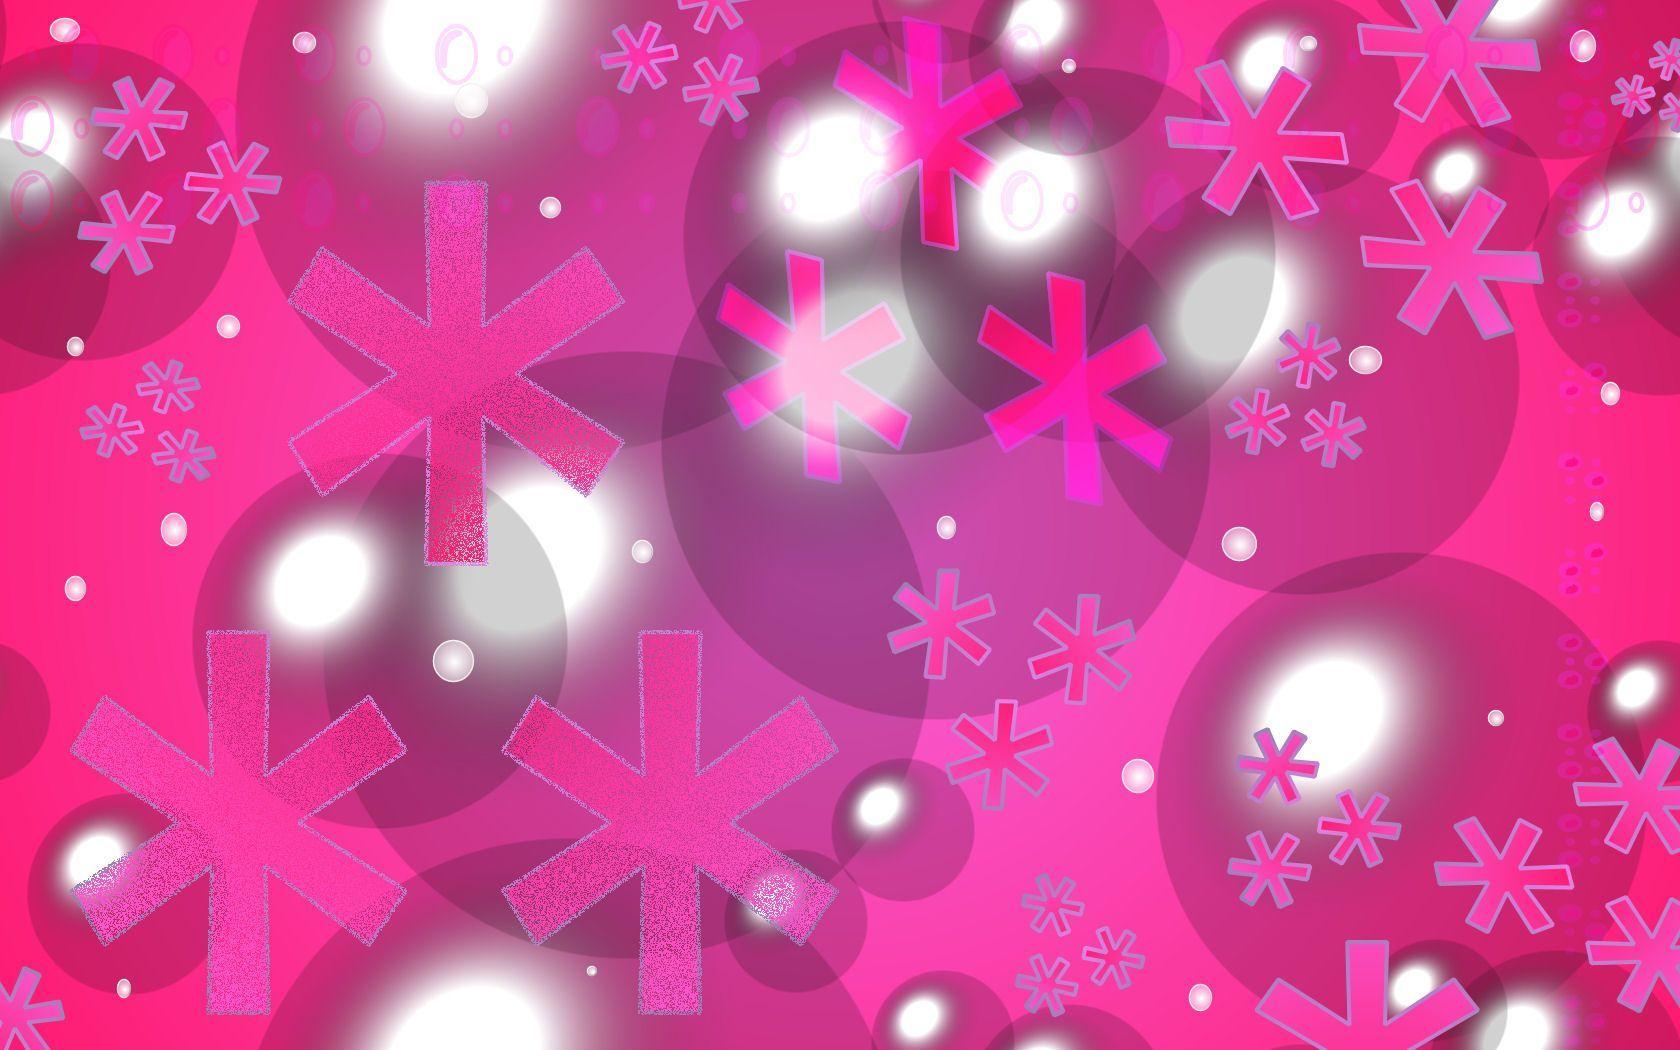 Wallpaper For > Pink Bubbles Background HD